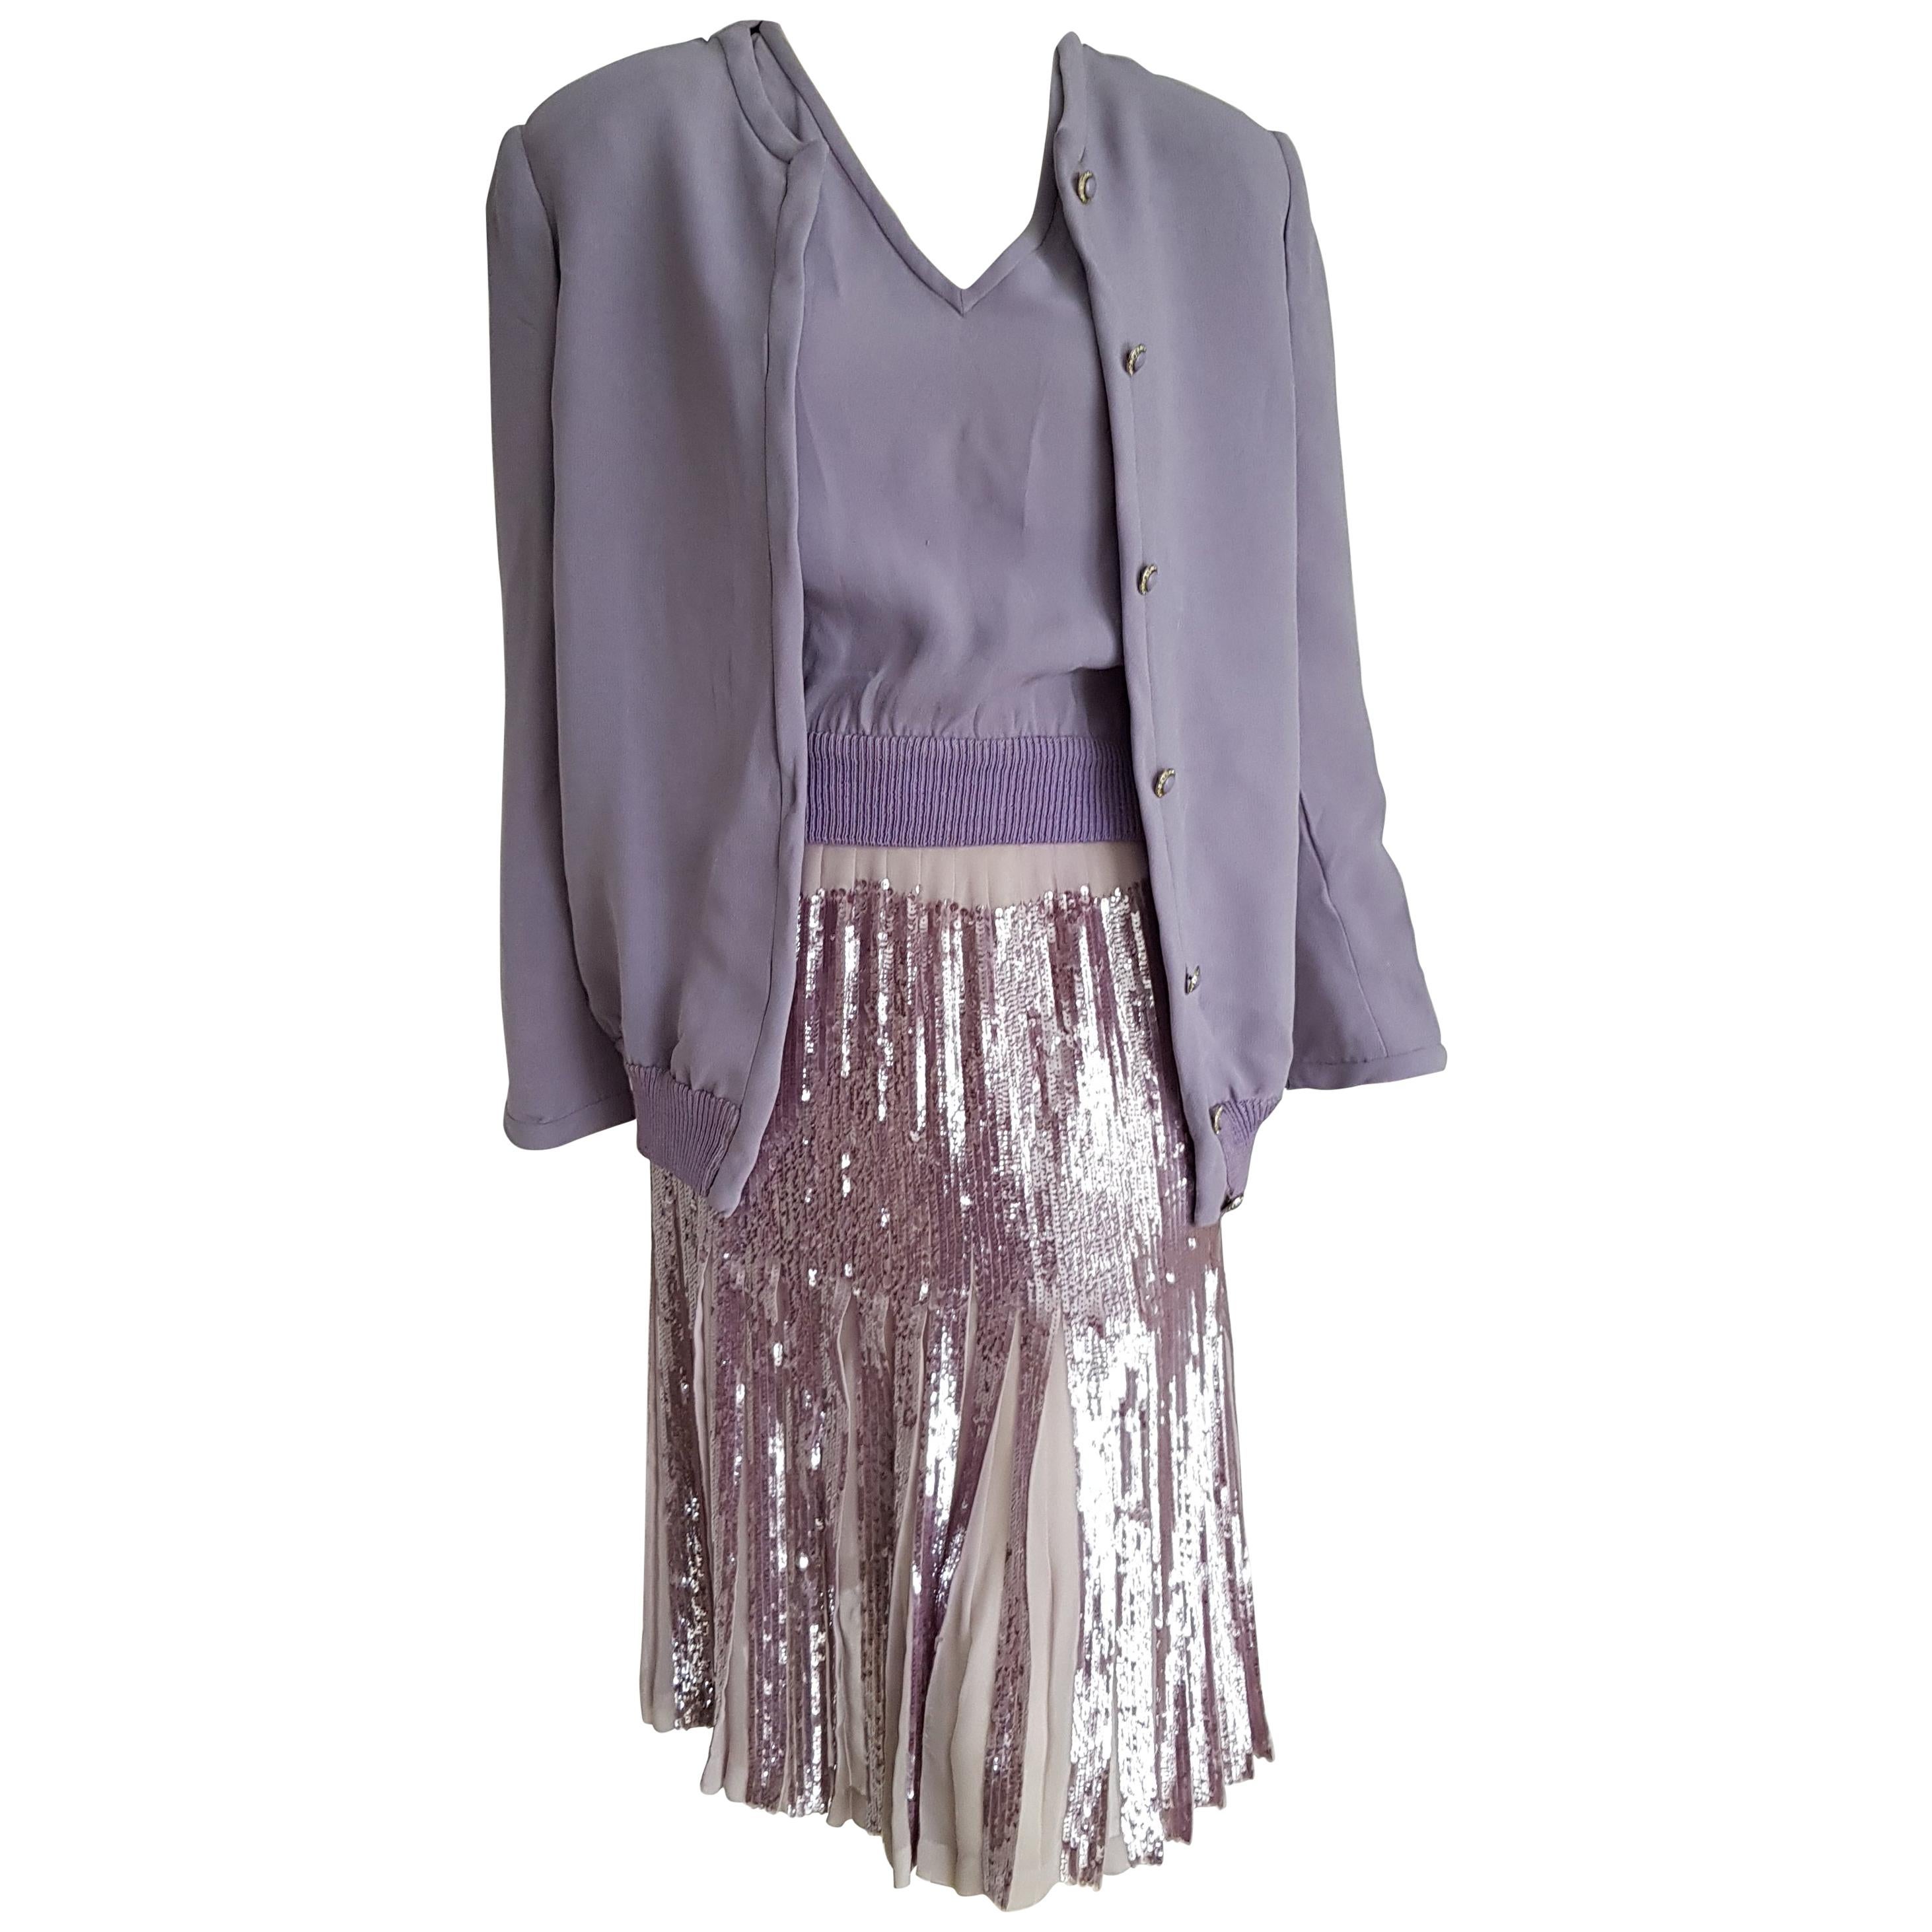 VALENTINO Haute Couture lilac, 3 pcs, top jacket and pleated skirt, with swarovski sequins, Valentino's single piece unique design, silk ensemble - Unworn, New

SIZE: equivalent to about Small / Medium, please review approx measurements as follows